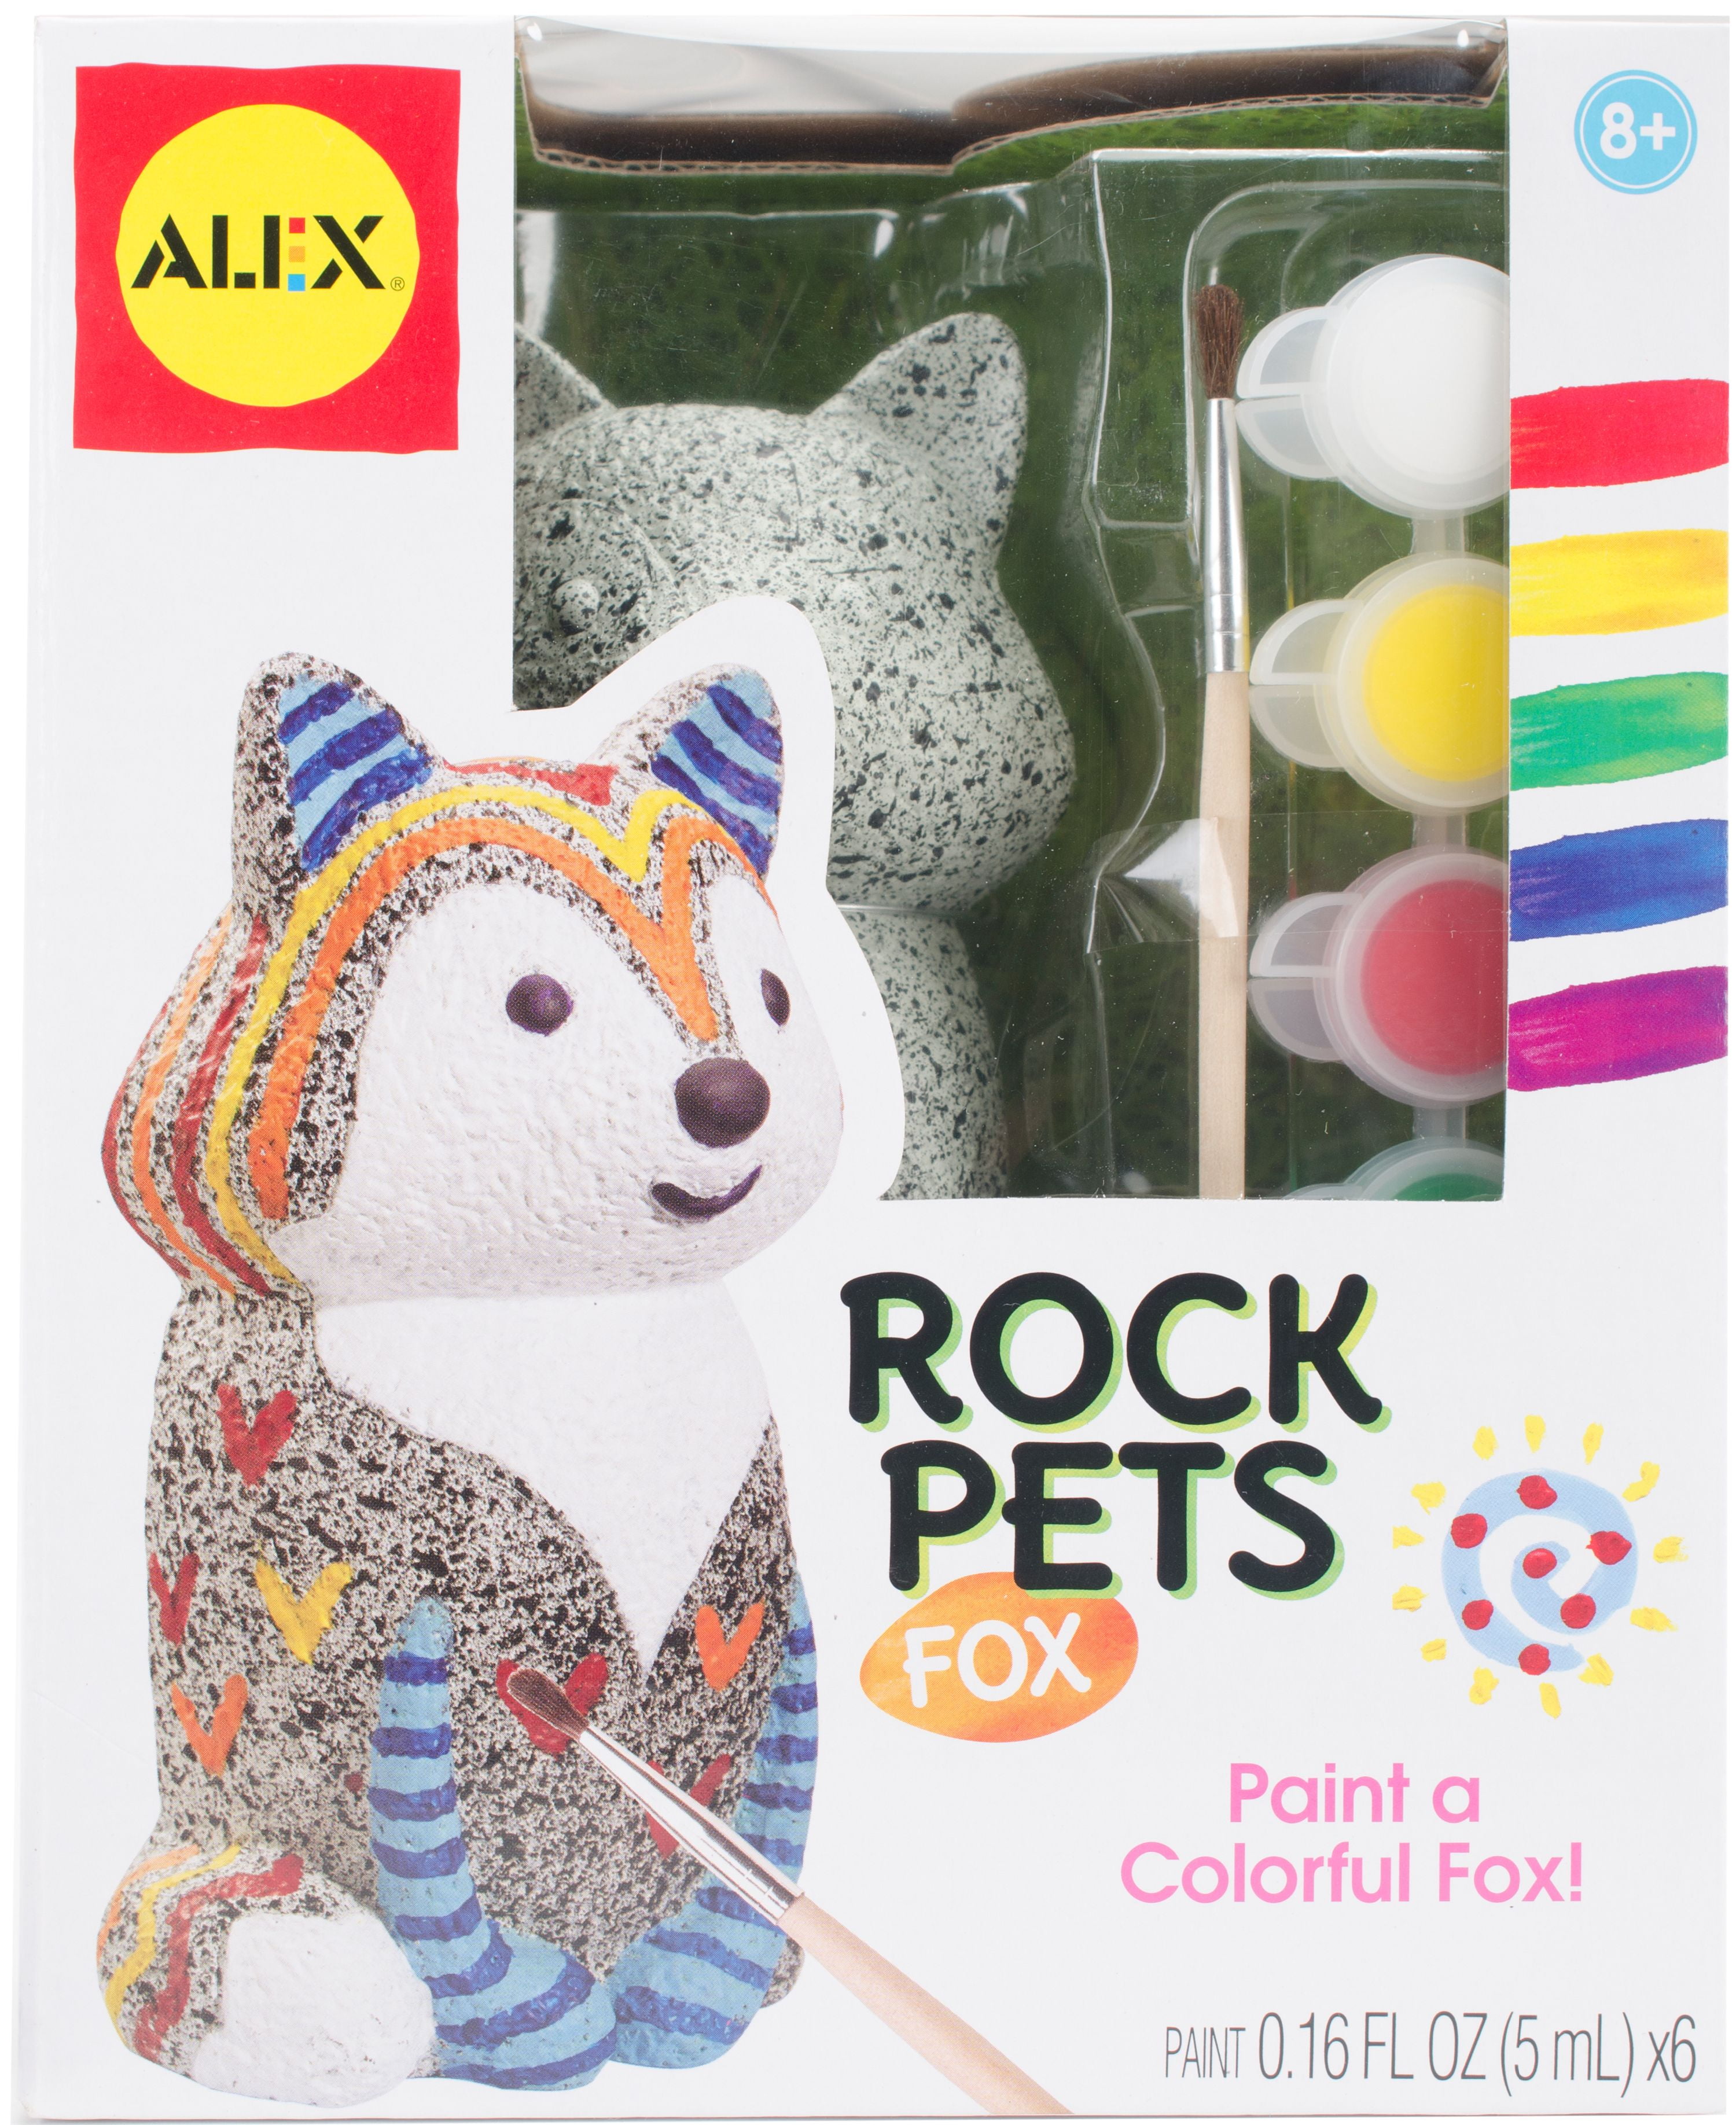 New Toy Arts & Crafts Toy Rock Pets Fox 